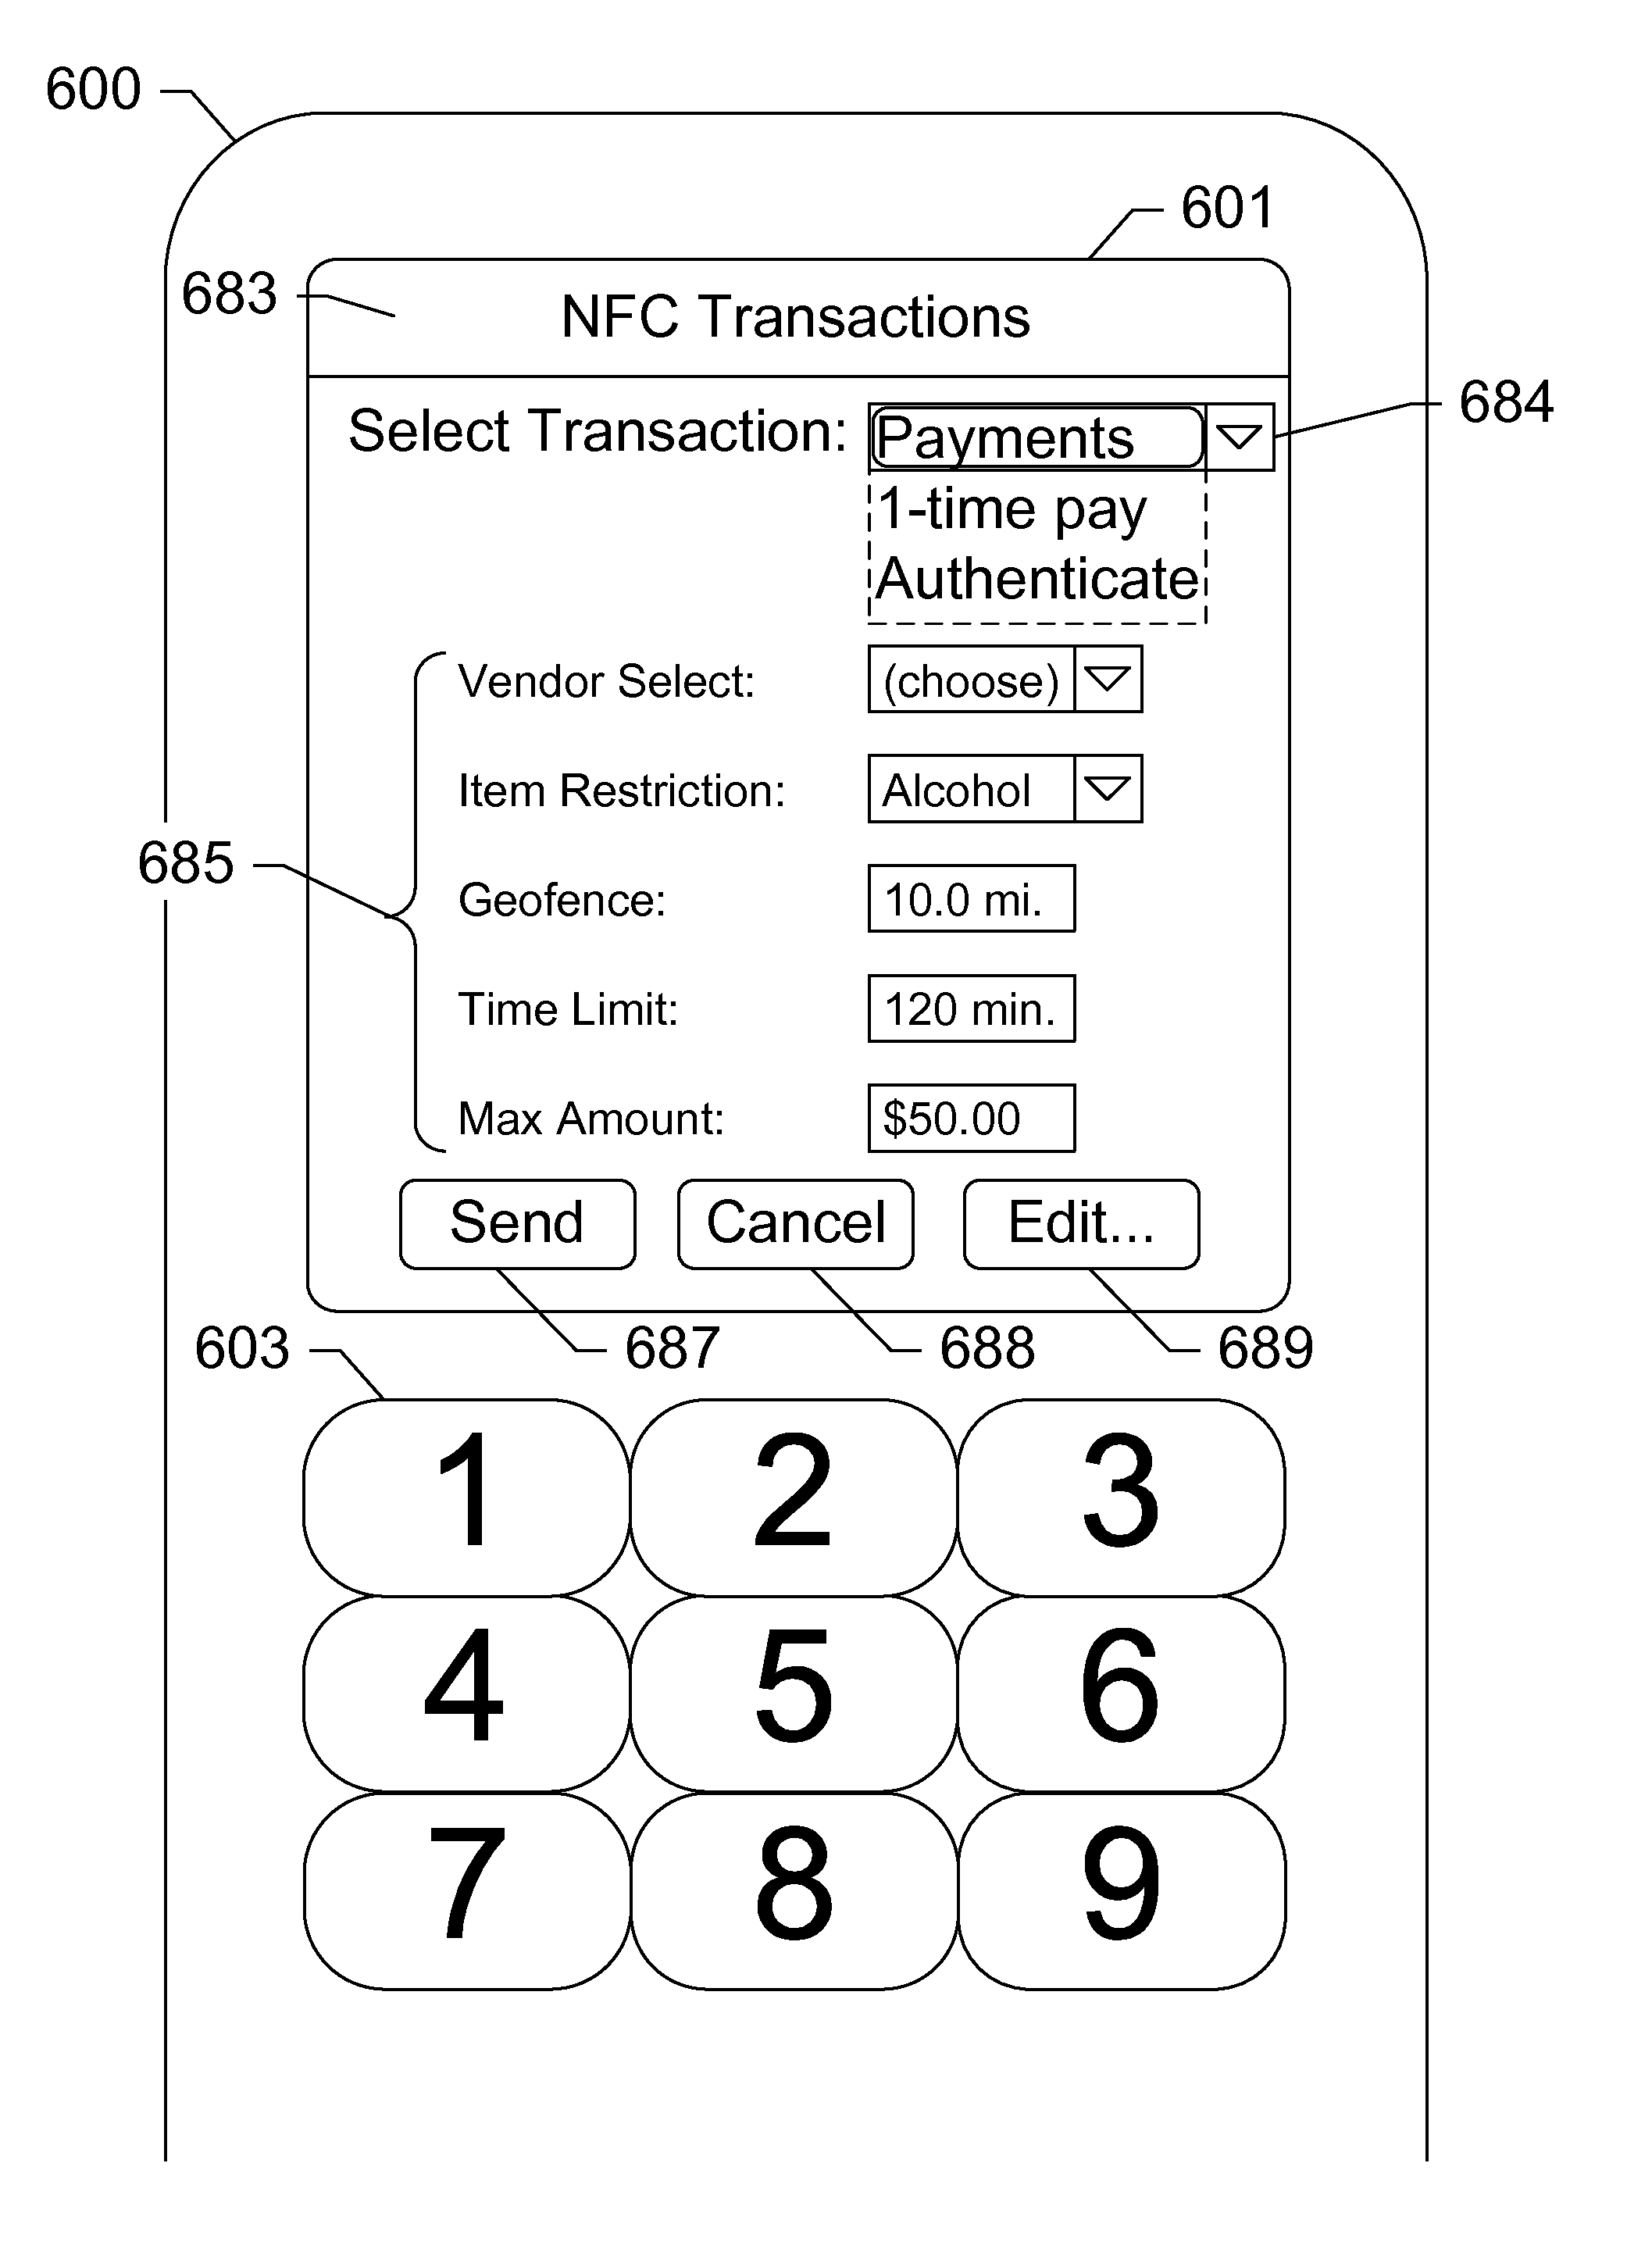 Security token for mobile near field communication transactions